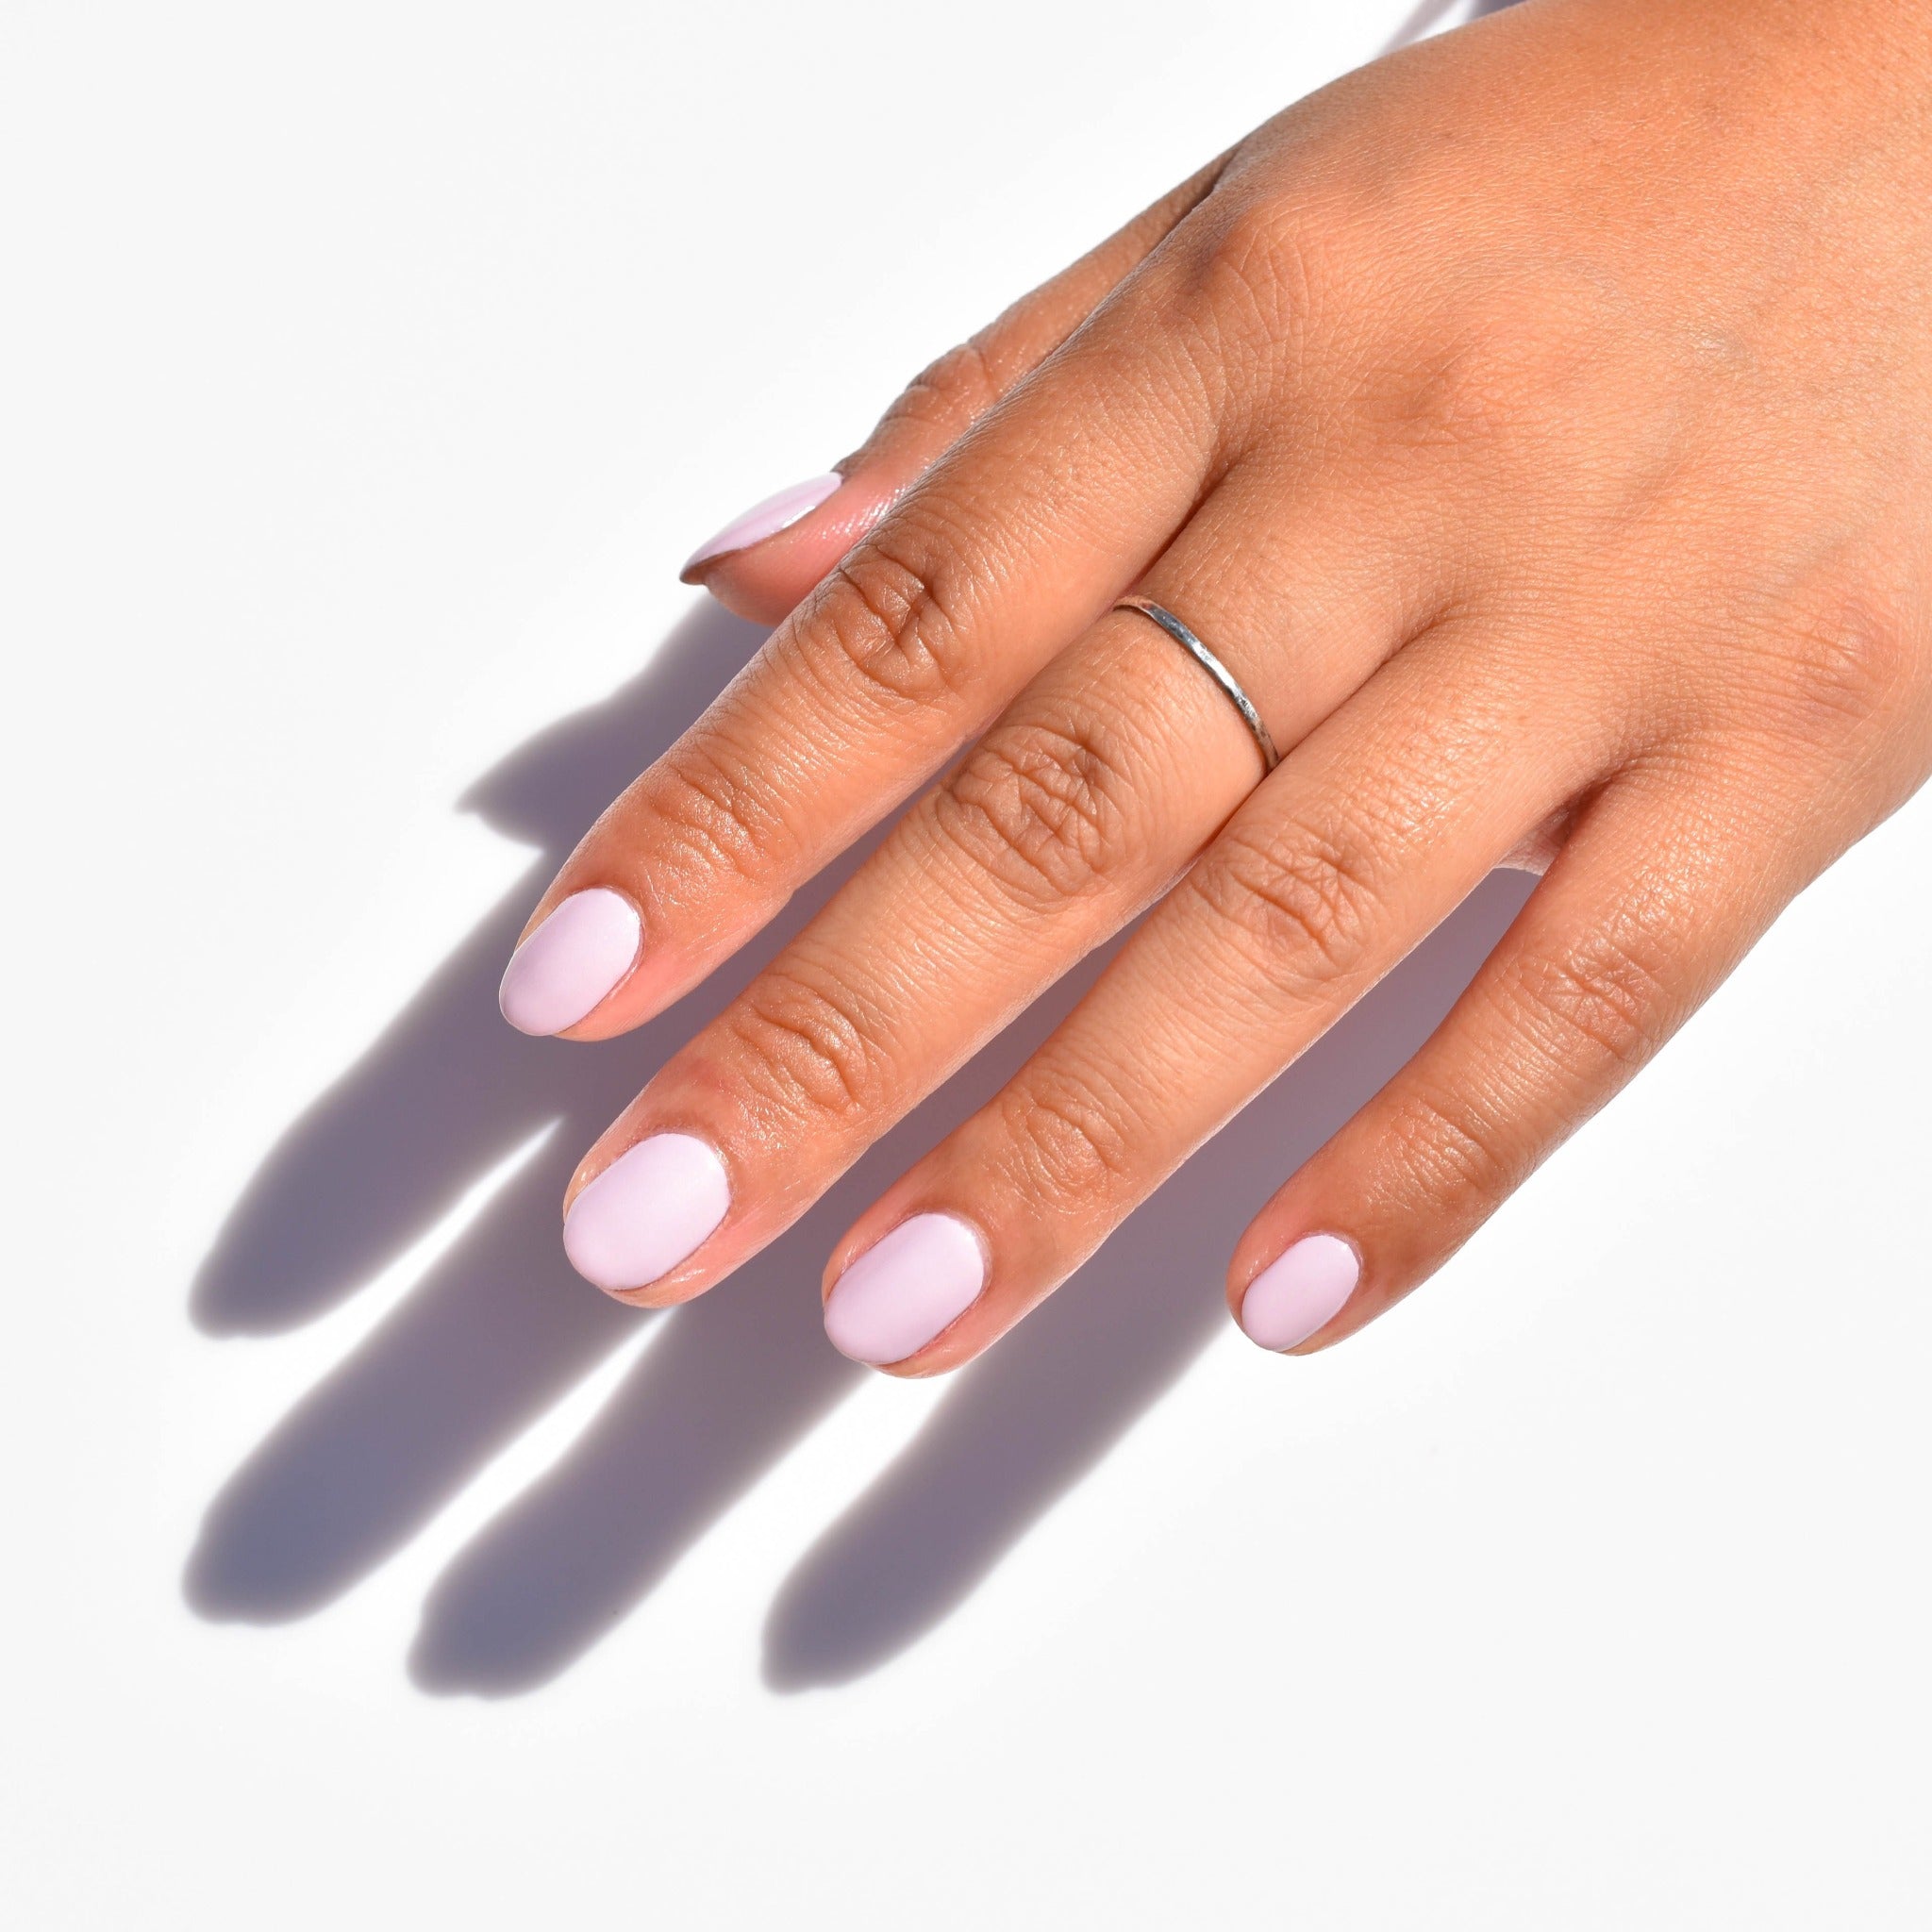 A close up of a mid toned hand comes in from the upper right corner wearing a silver ring and Hen Party nail polish from Hello Birdie in a creamy pink hue. The hand casts a hard light shadow diagonally against a matte white background.